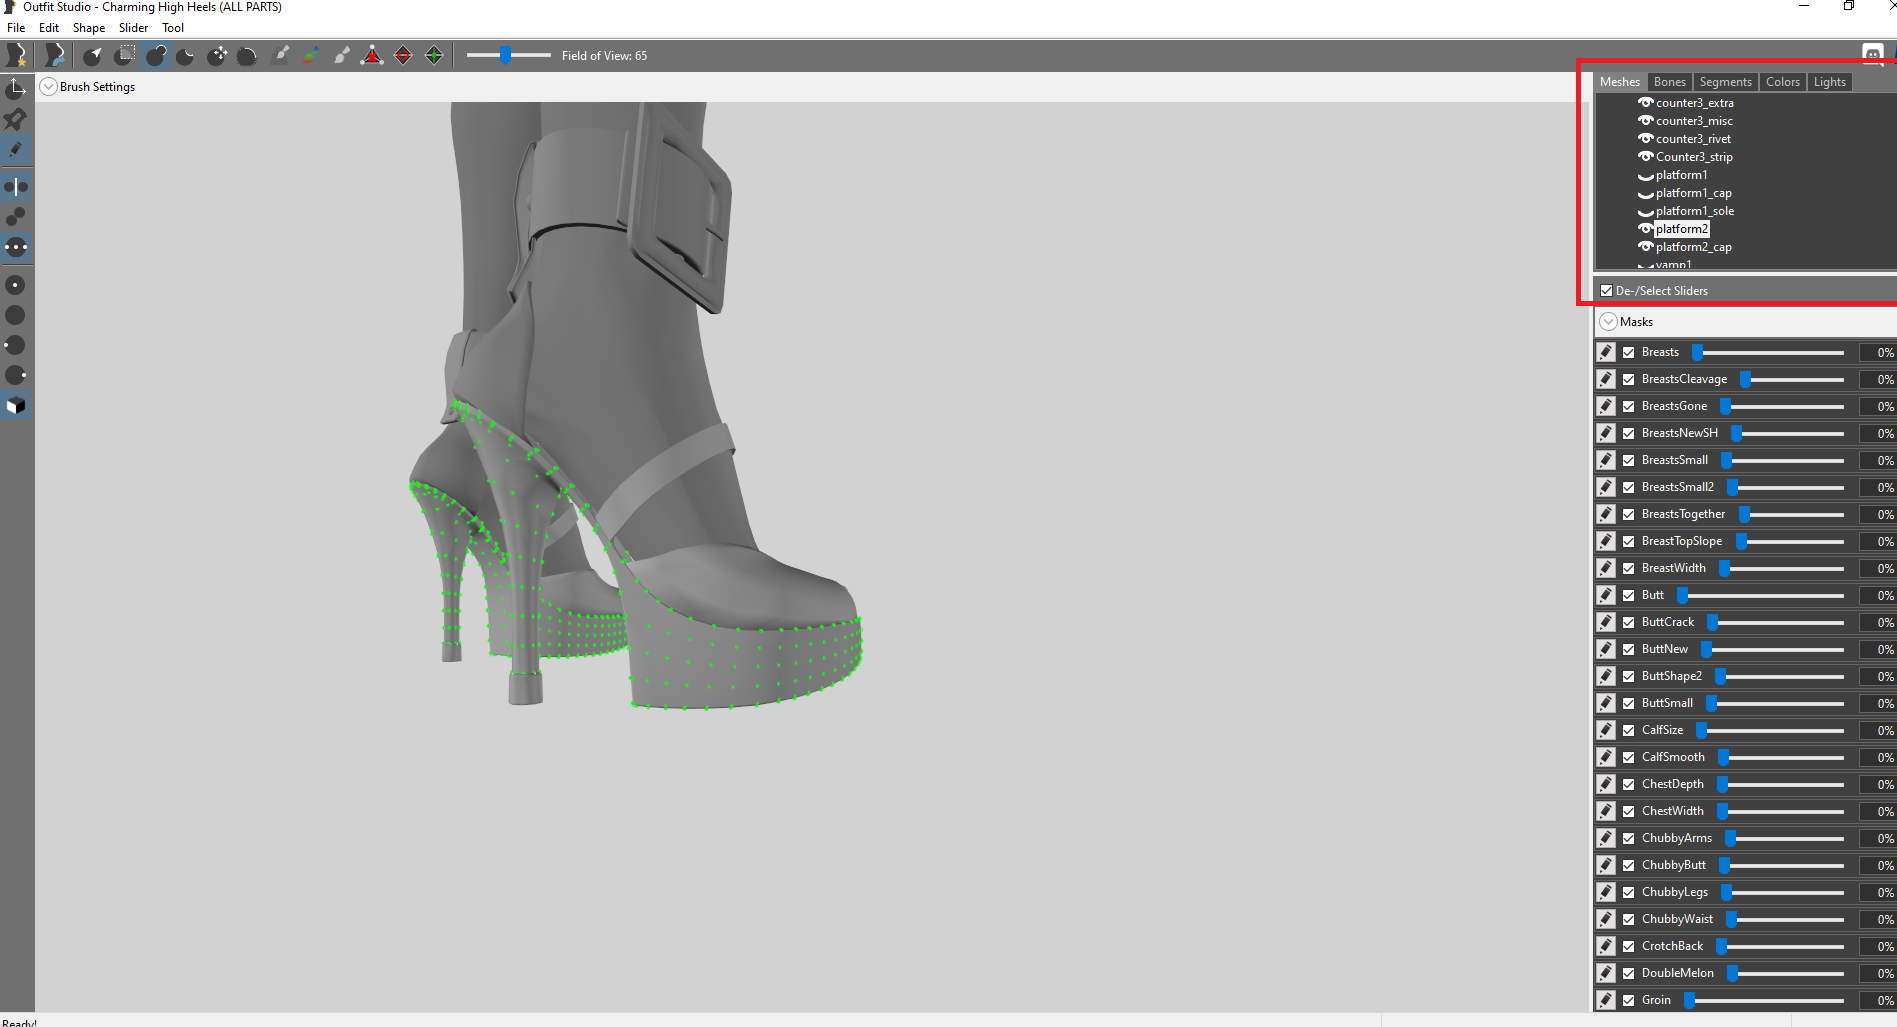 Fallout 4 High heels and updating to fusion girl 1.6 - Fallout 4 ...